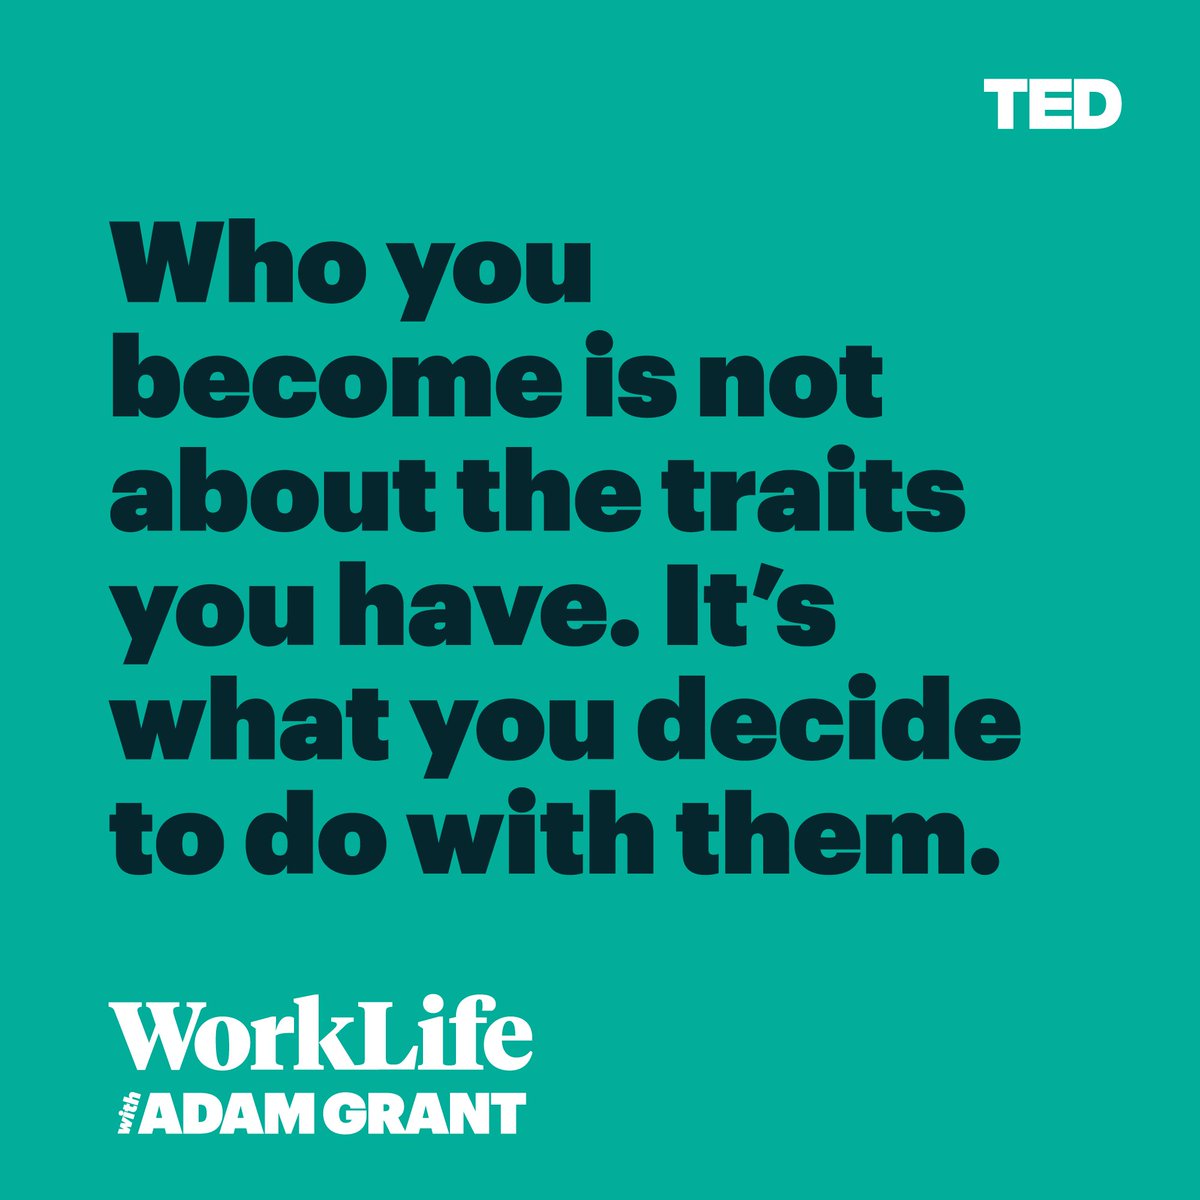 Your personality matters, but your ability to adapt matters more. The most effective leaders aren't extraverts or introverts. They're ambiverts: people who strike a balance of talking and listening.
#WorkLife: itunes.apple.com/us/podcast/wor…